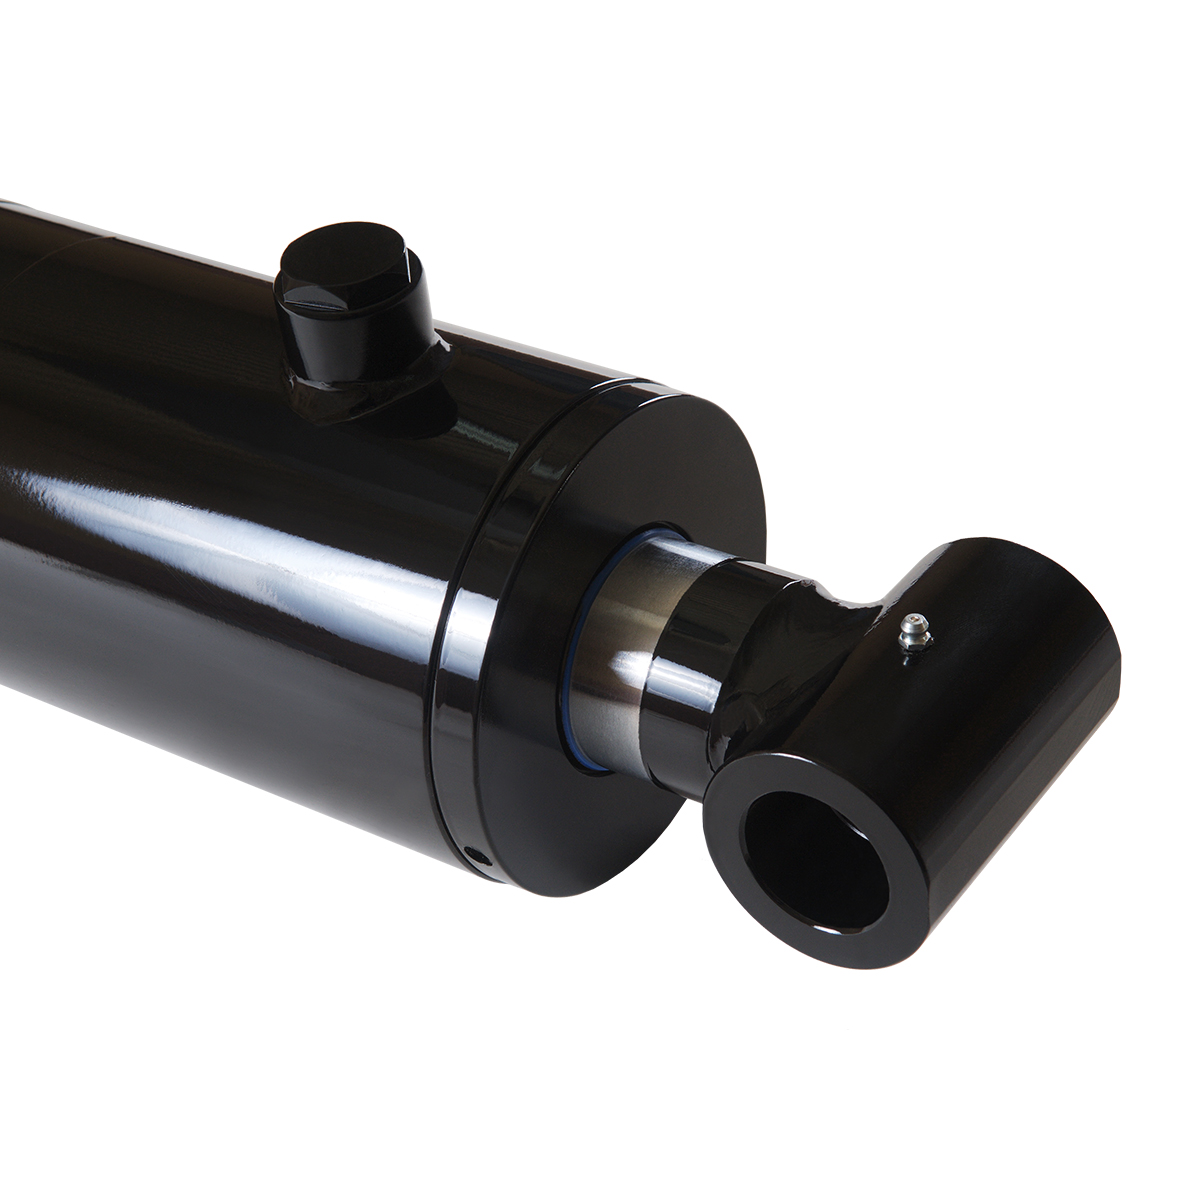 5 bore x 12 stroke hydraulic cylinder, welded cross tube double acting cylinder | Magister Hydraulics